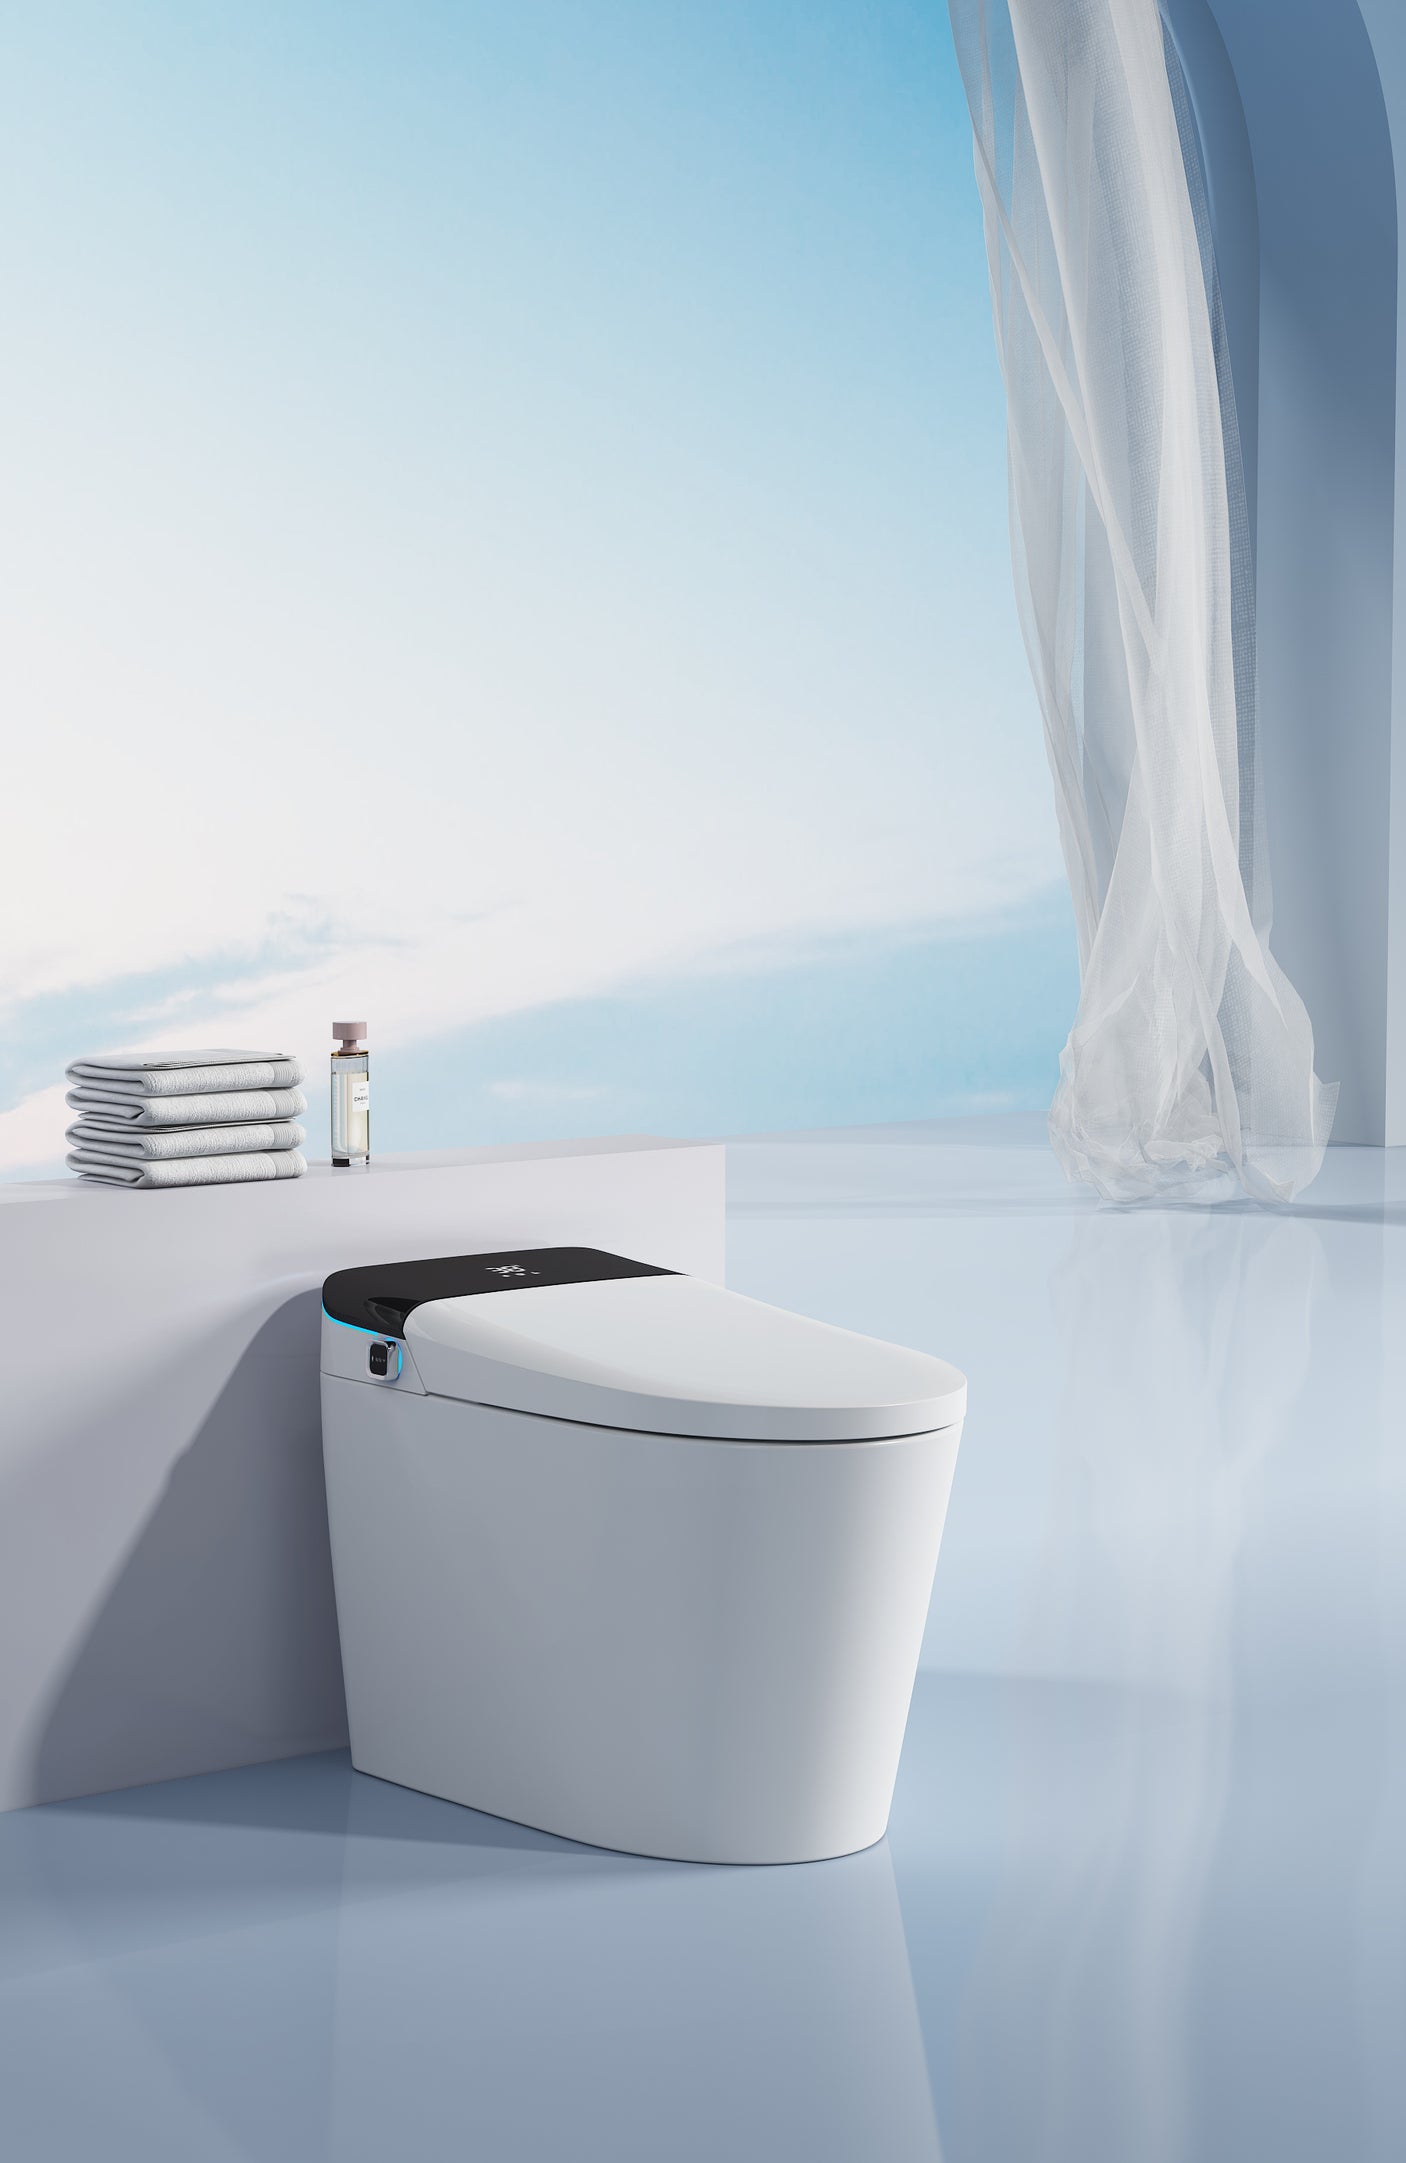 Revolutionize Your Bathroom Experience with Our State-of-the-Art Smart Toilet - The Ultimate in Comfort, Hygiene, and Convenience